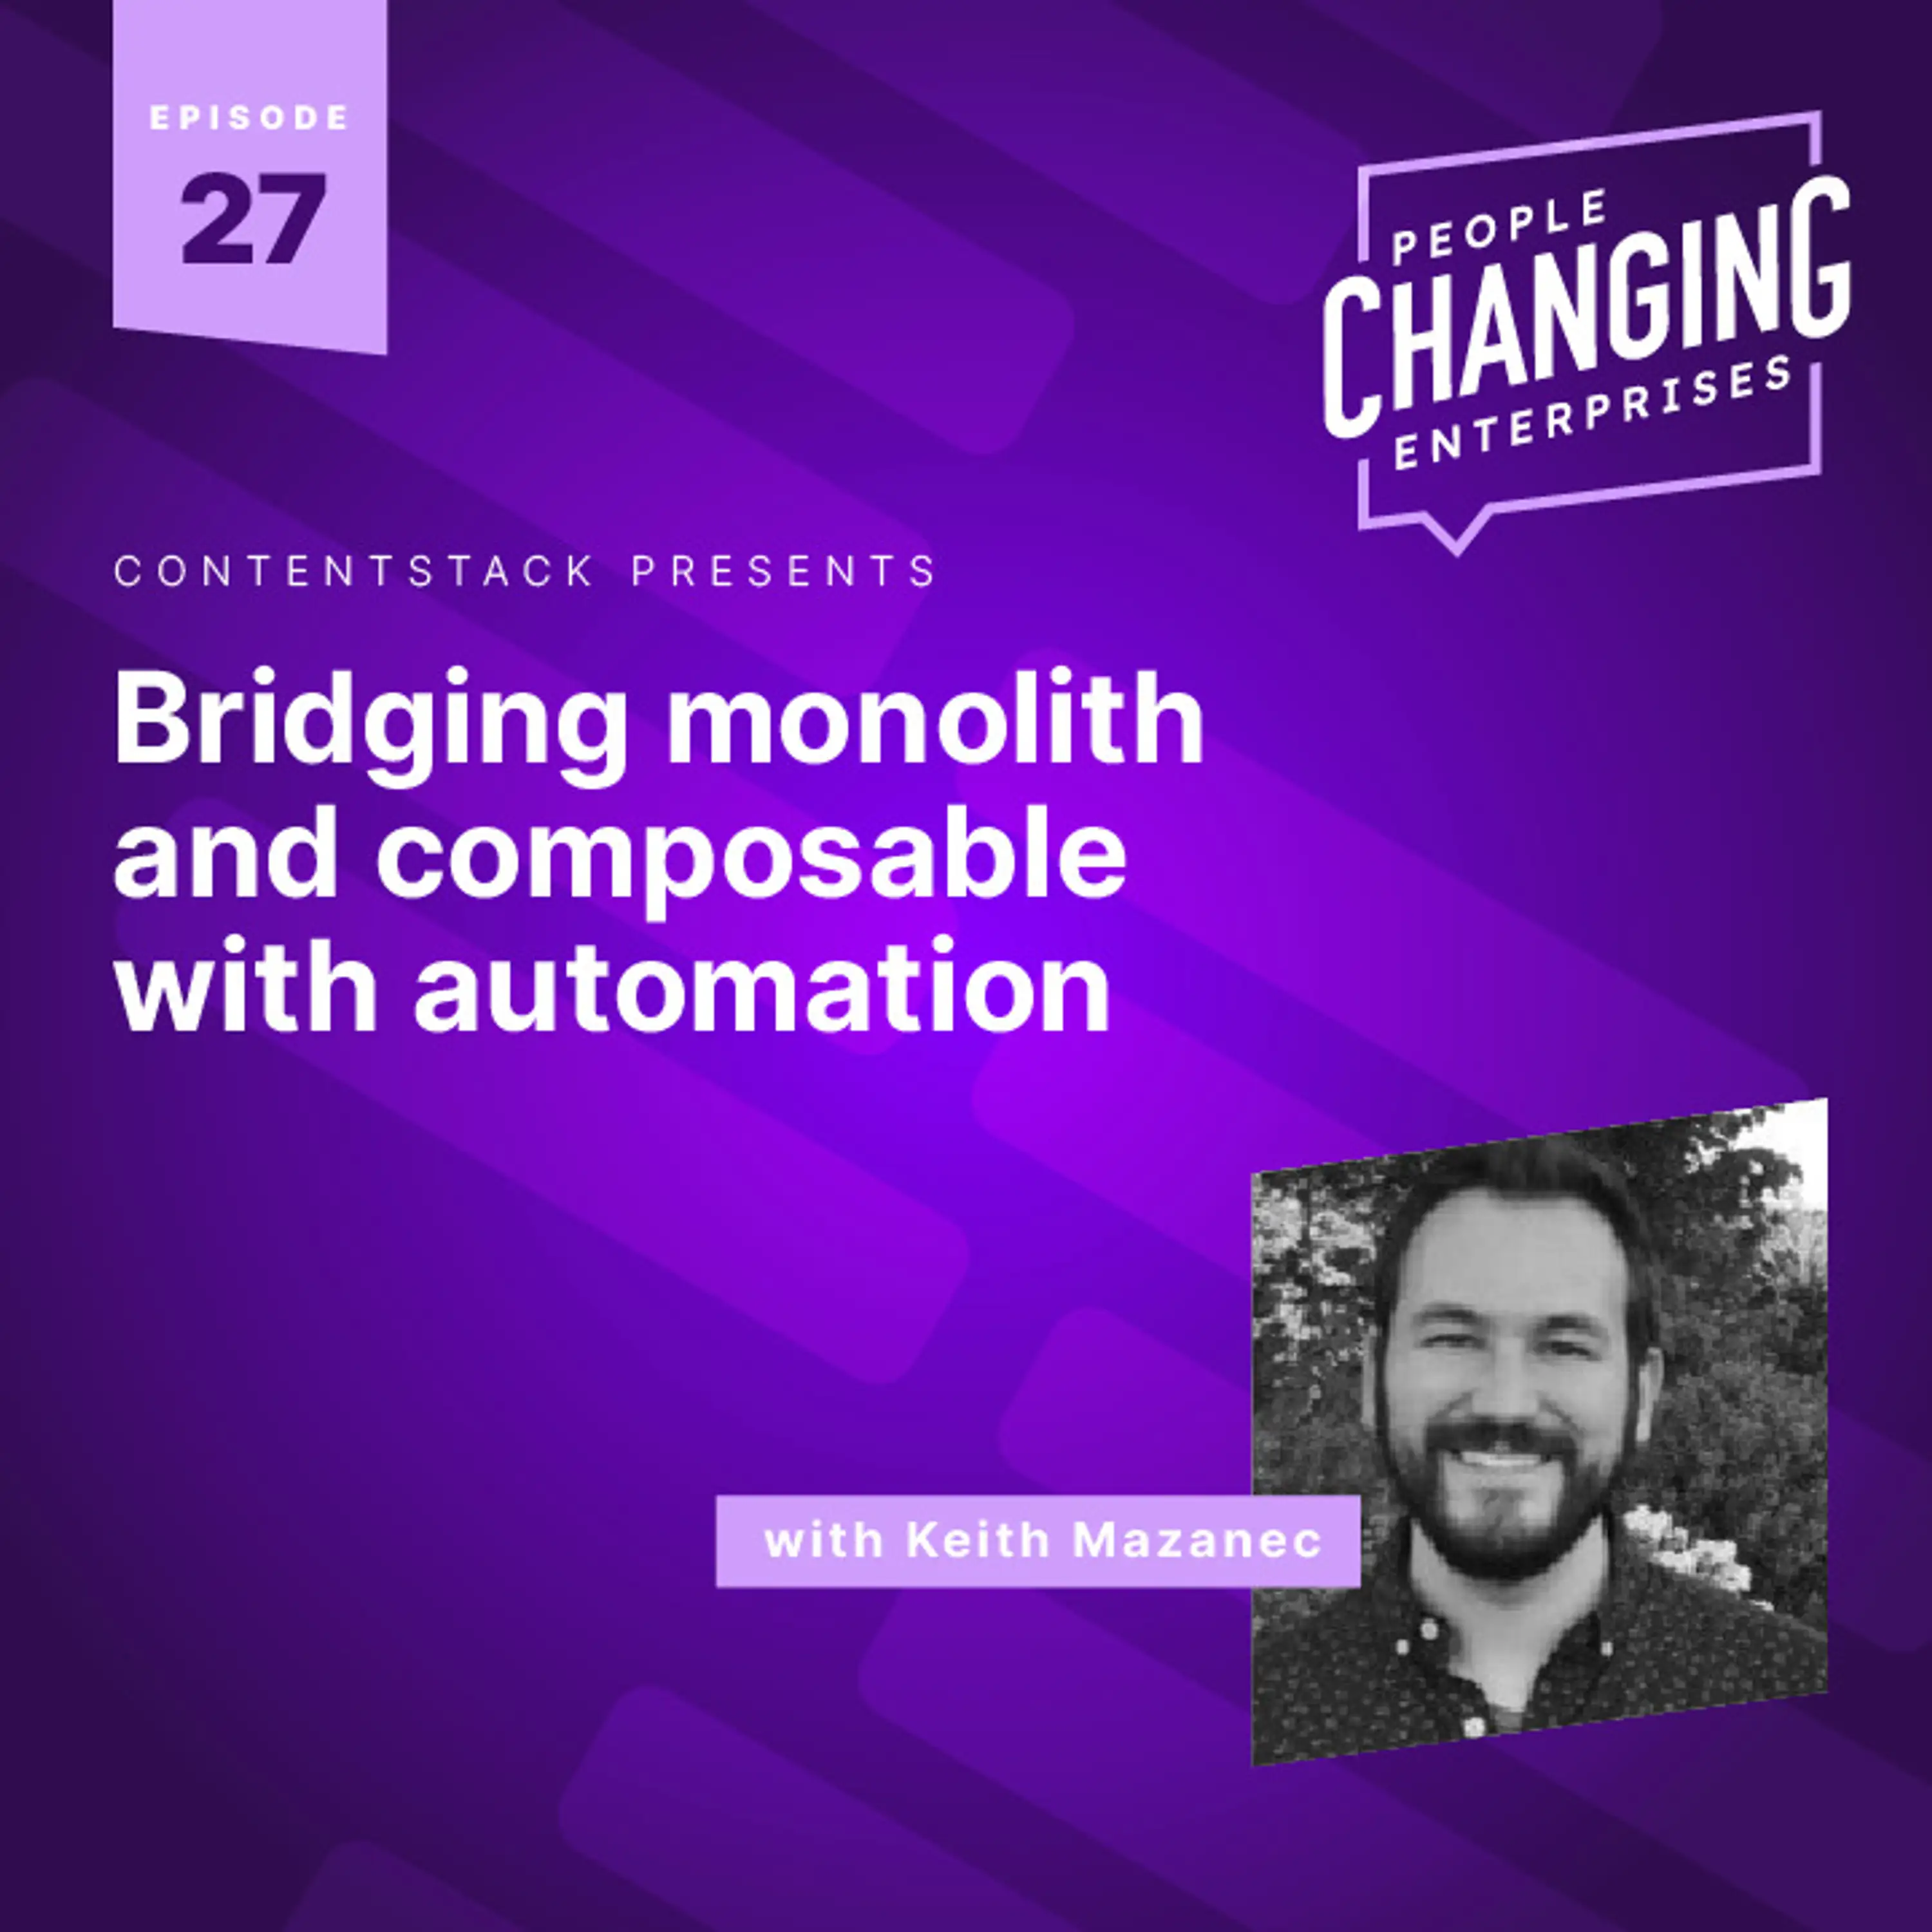 Bridging monolith and composable with automation, with Director of Engineering Keith Mazanec